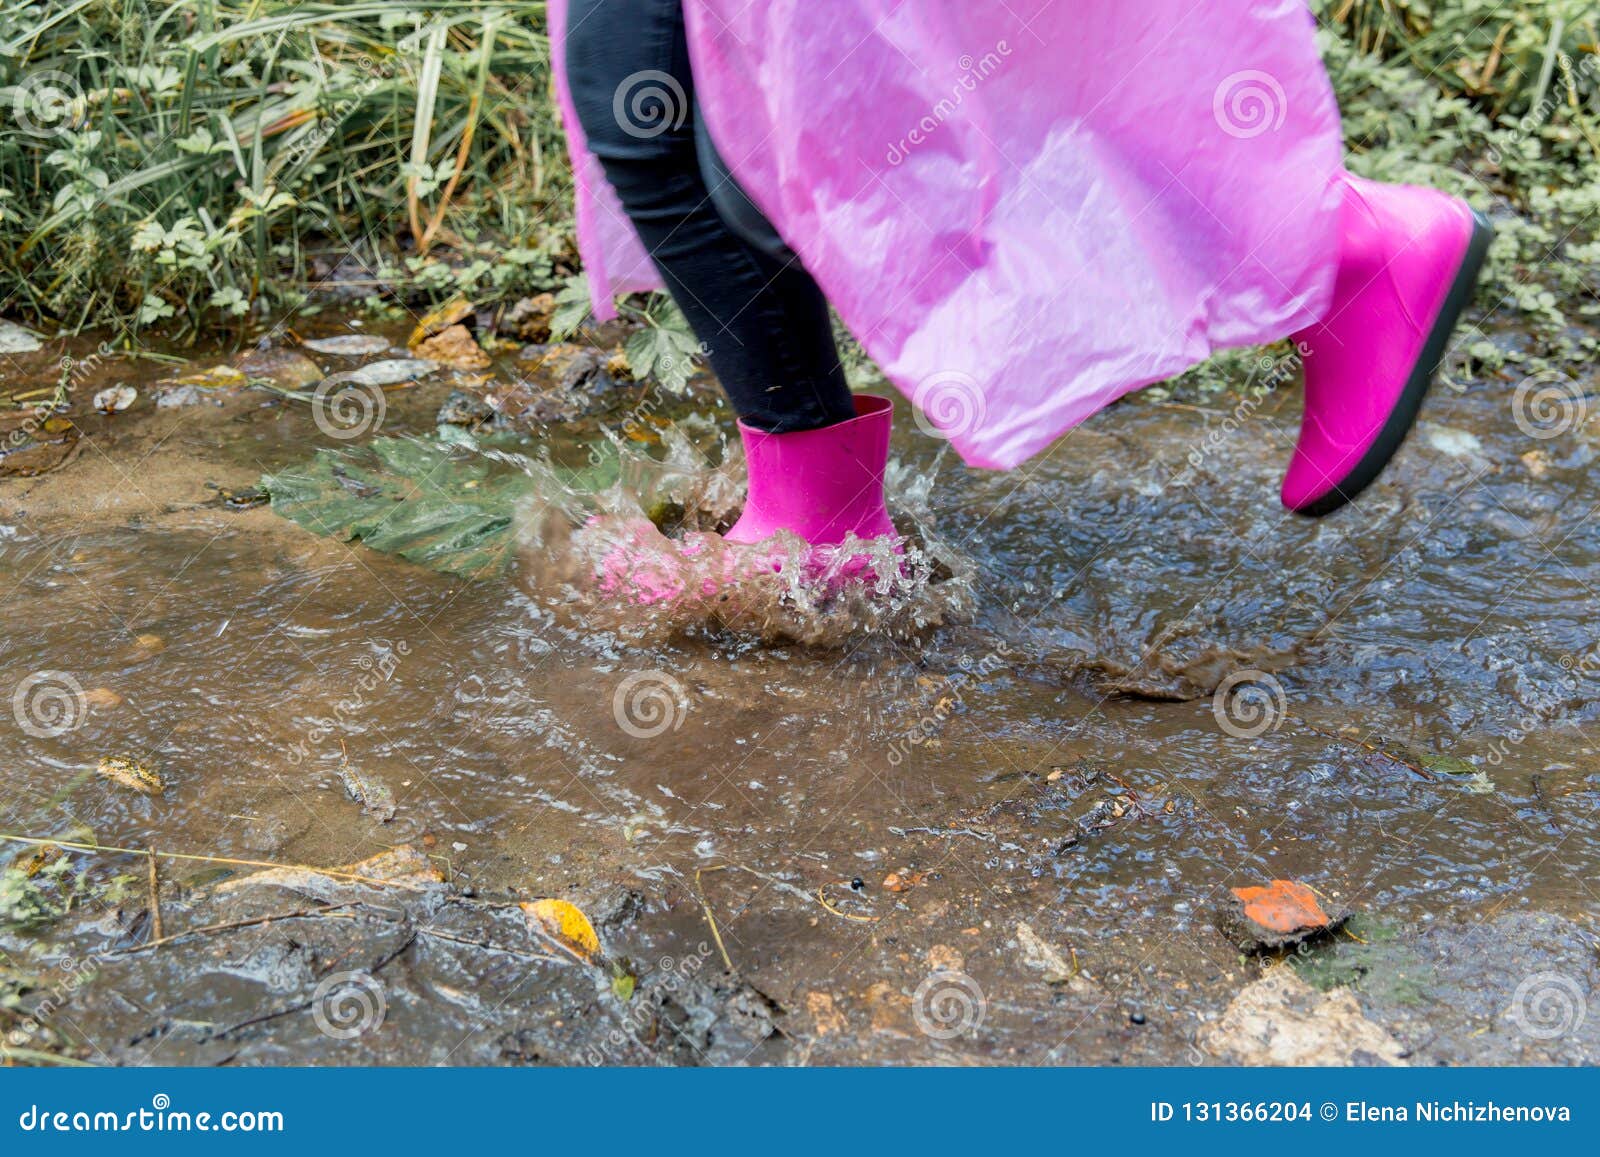 Young Children Playing In A Mud Puddle Stock Image - Image 